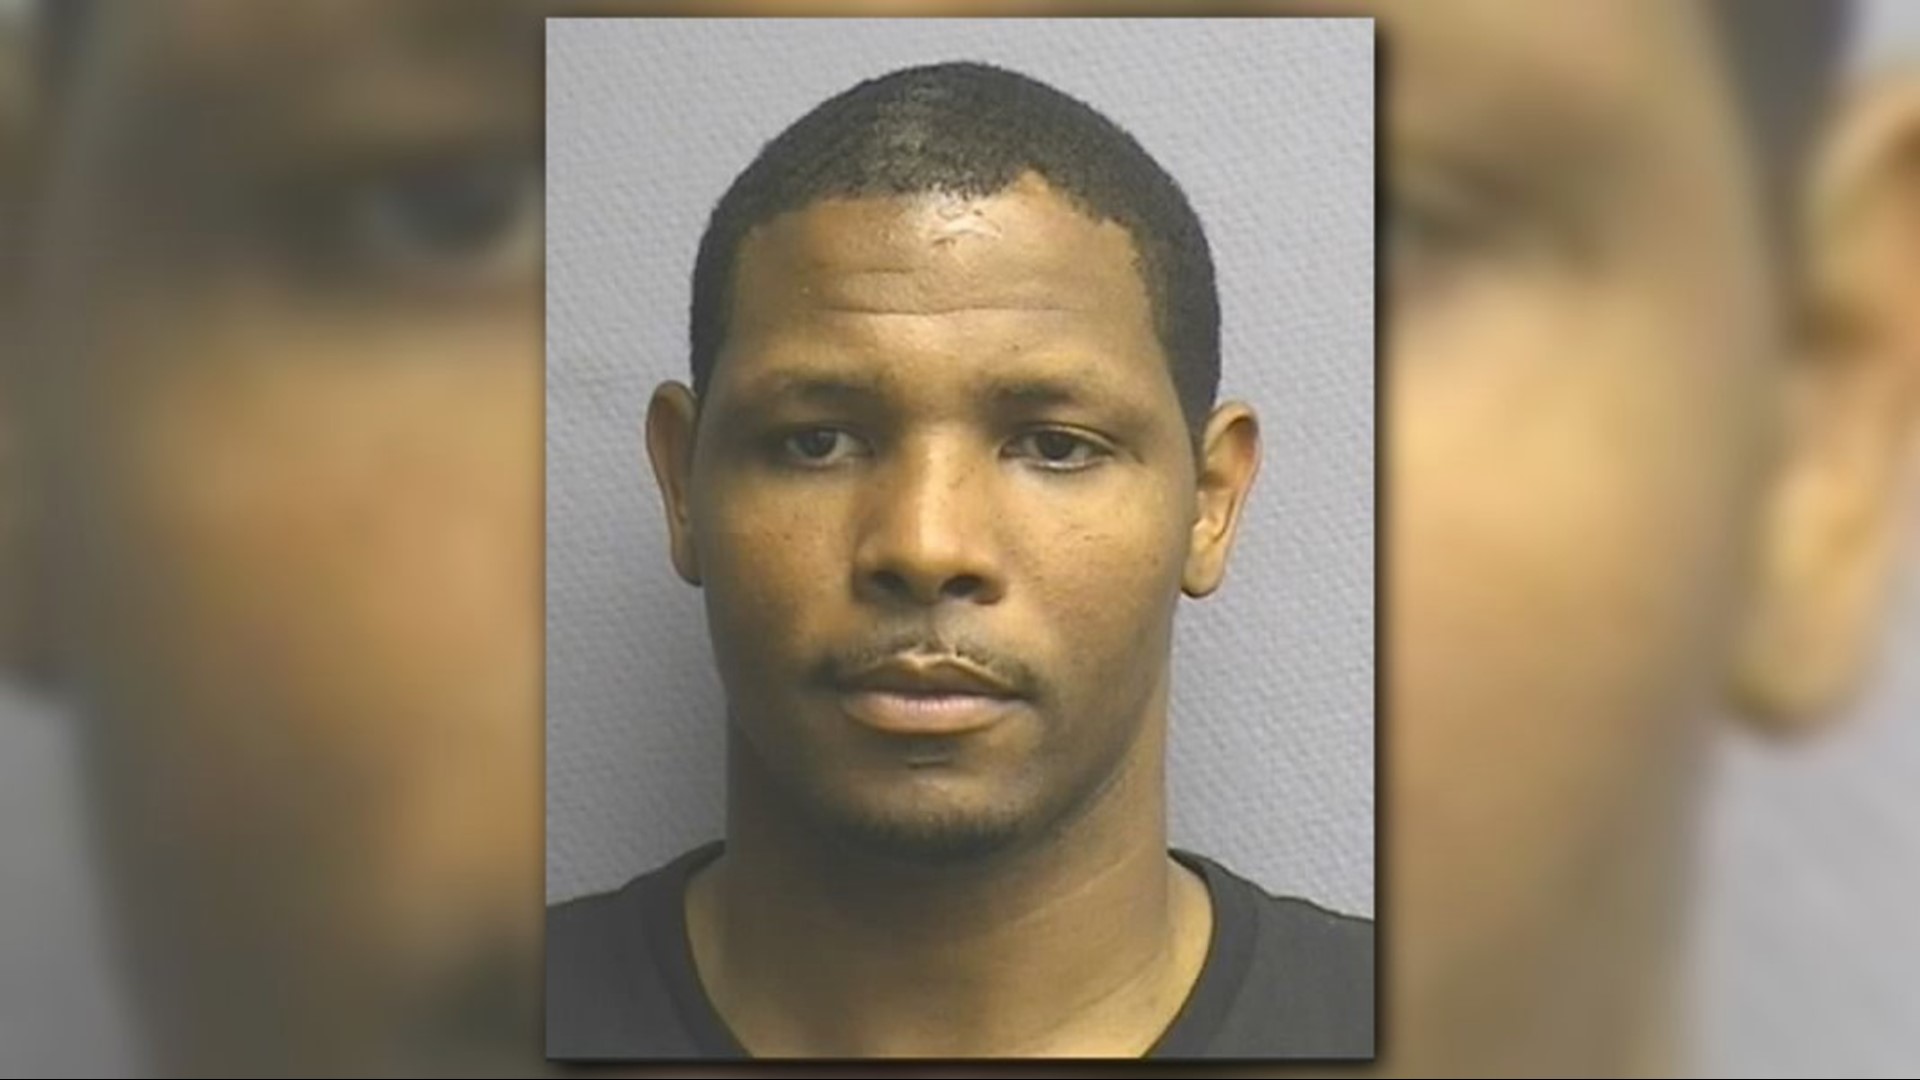 Houston Man Sentenced To 30 Years For Intentionally Infecting Partner With Hiv